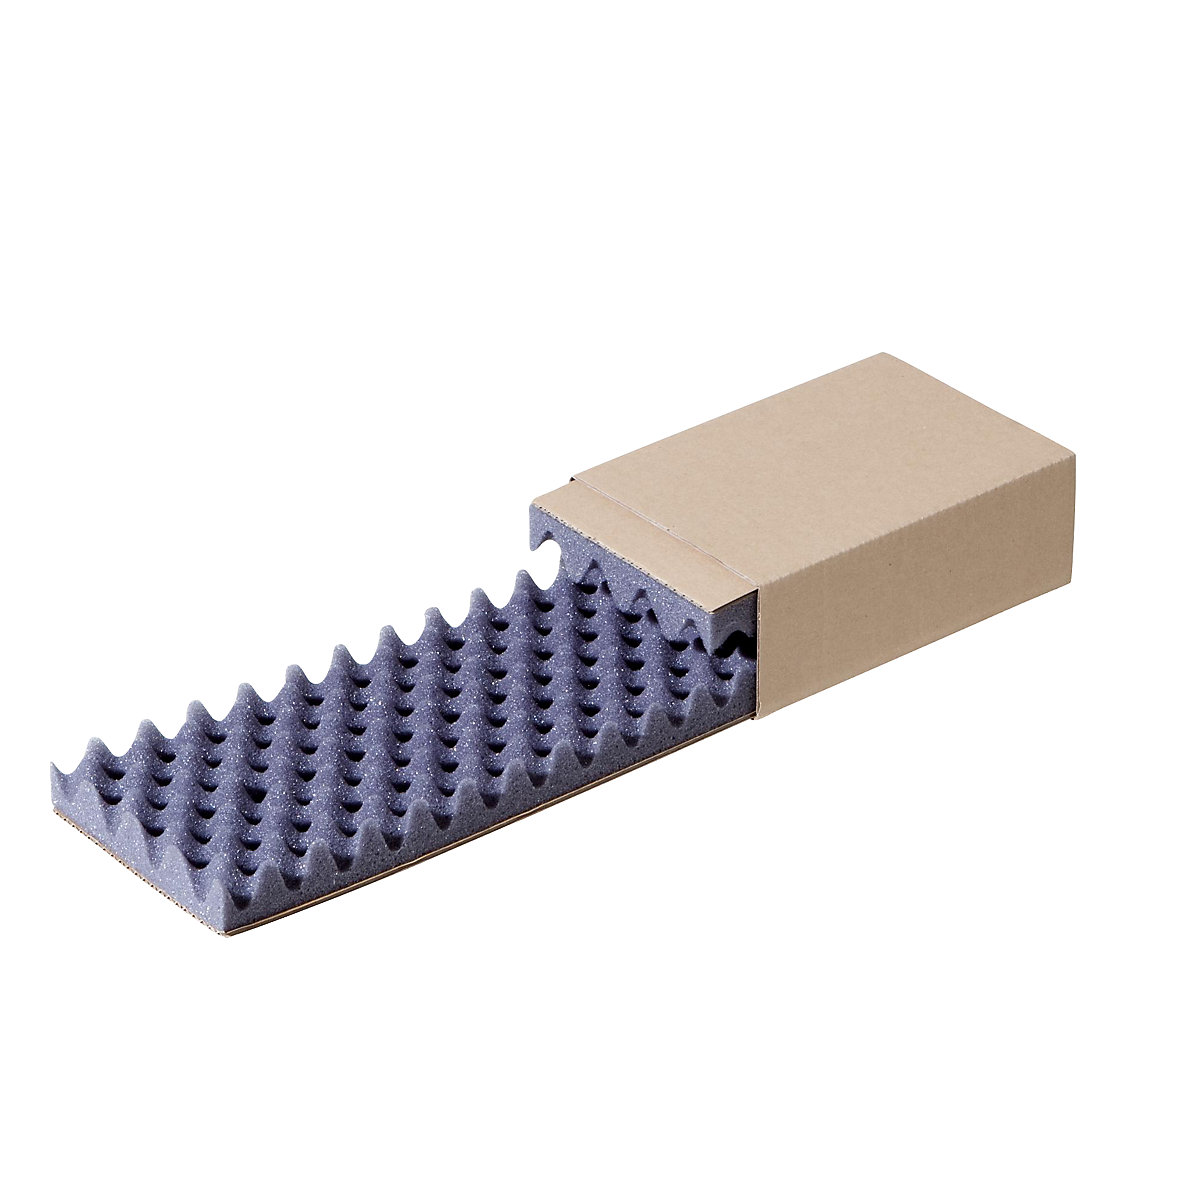 Slide boxes, internal part FEFCO 0907, external part FEFCO 0503, padded, internal dimensions 210 x 140 x 65 mm, pack of 50-4